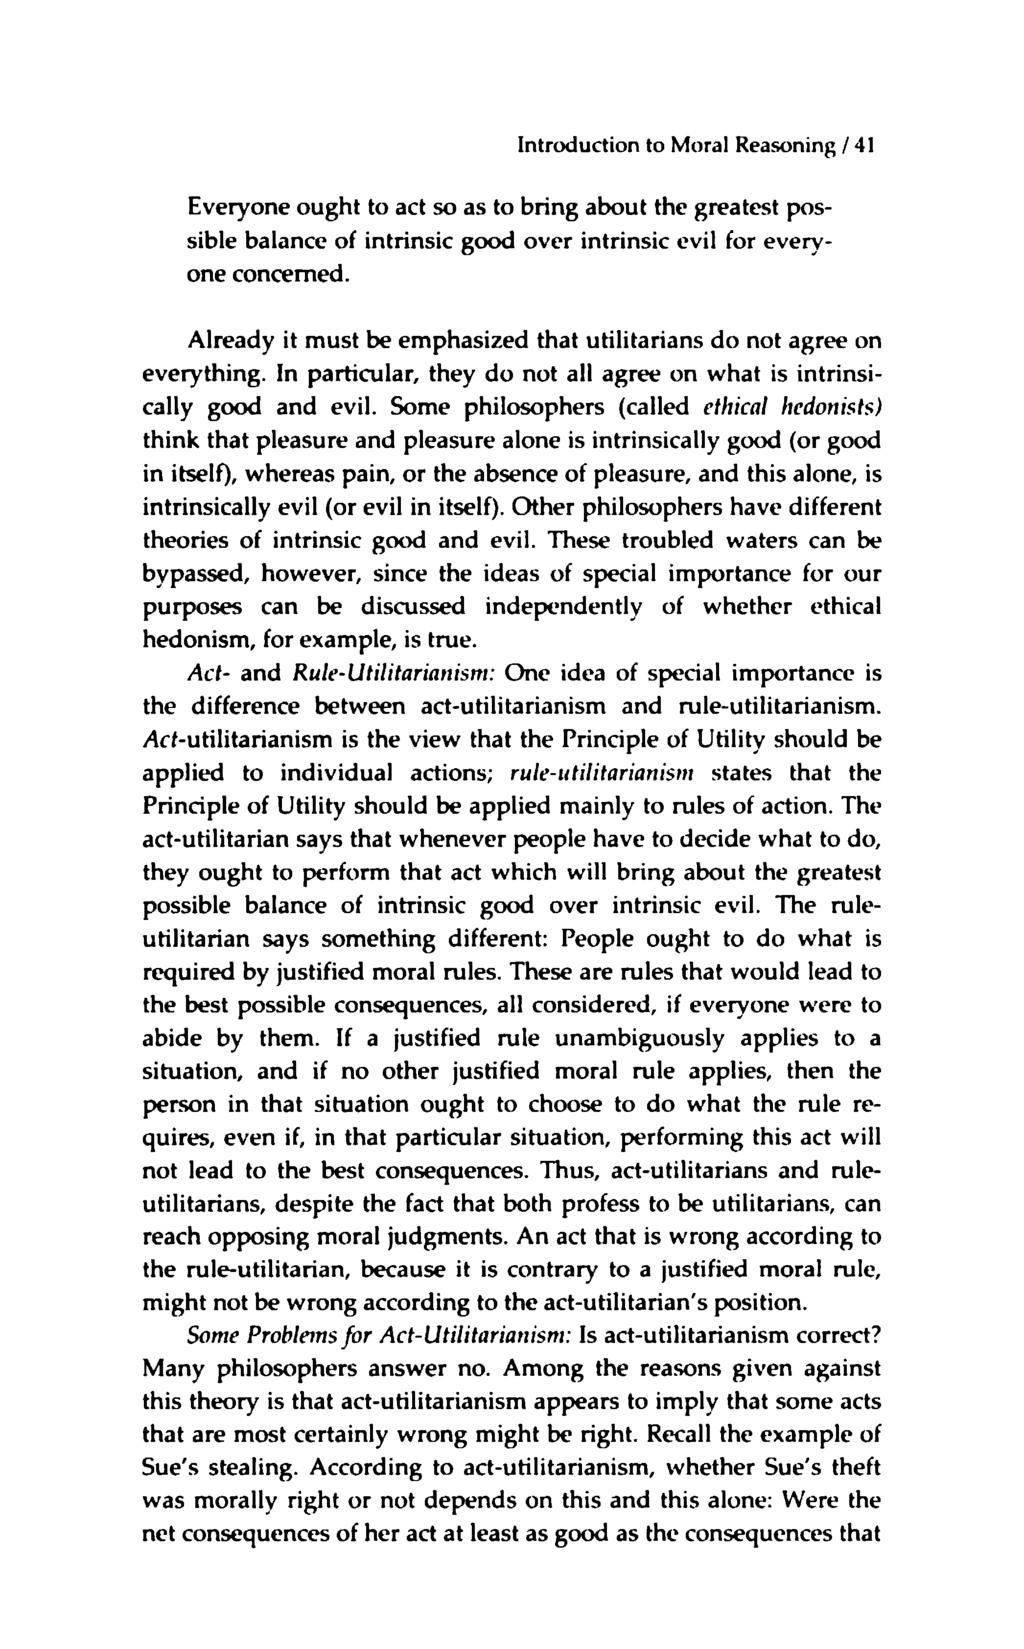 Introduction to Moral Reasoning / 41 Everyone ought to act so as to bring about the greatest possible balance of intrinsic good over intrinsic evil for everyone concerned.